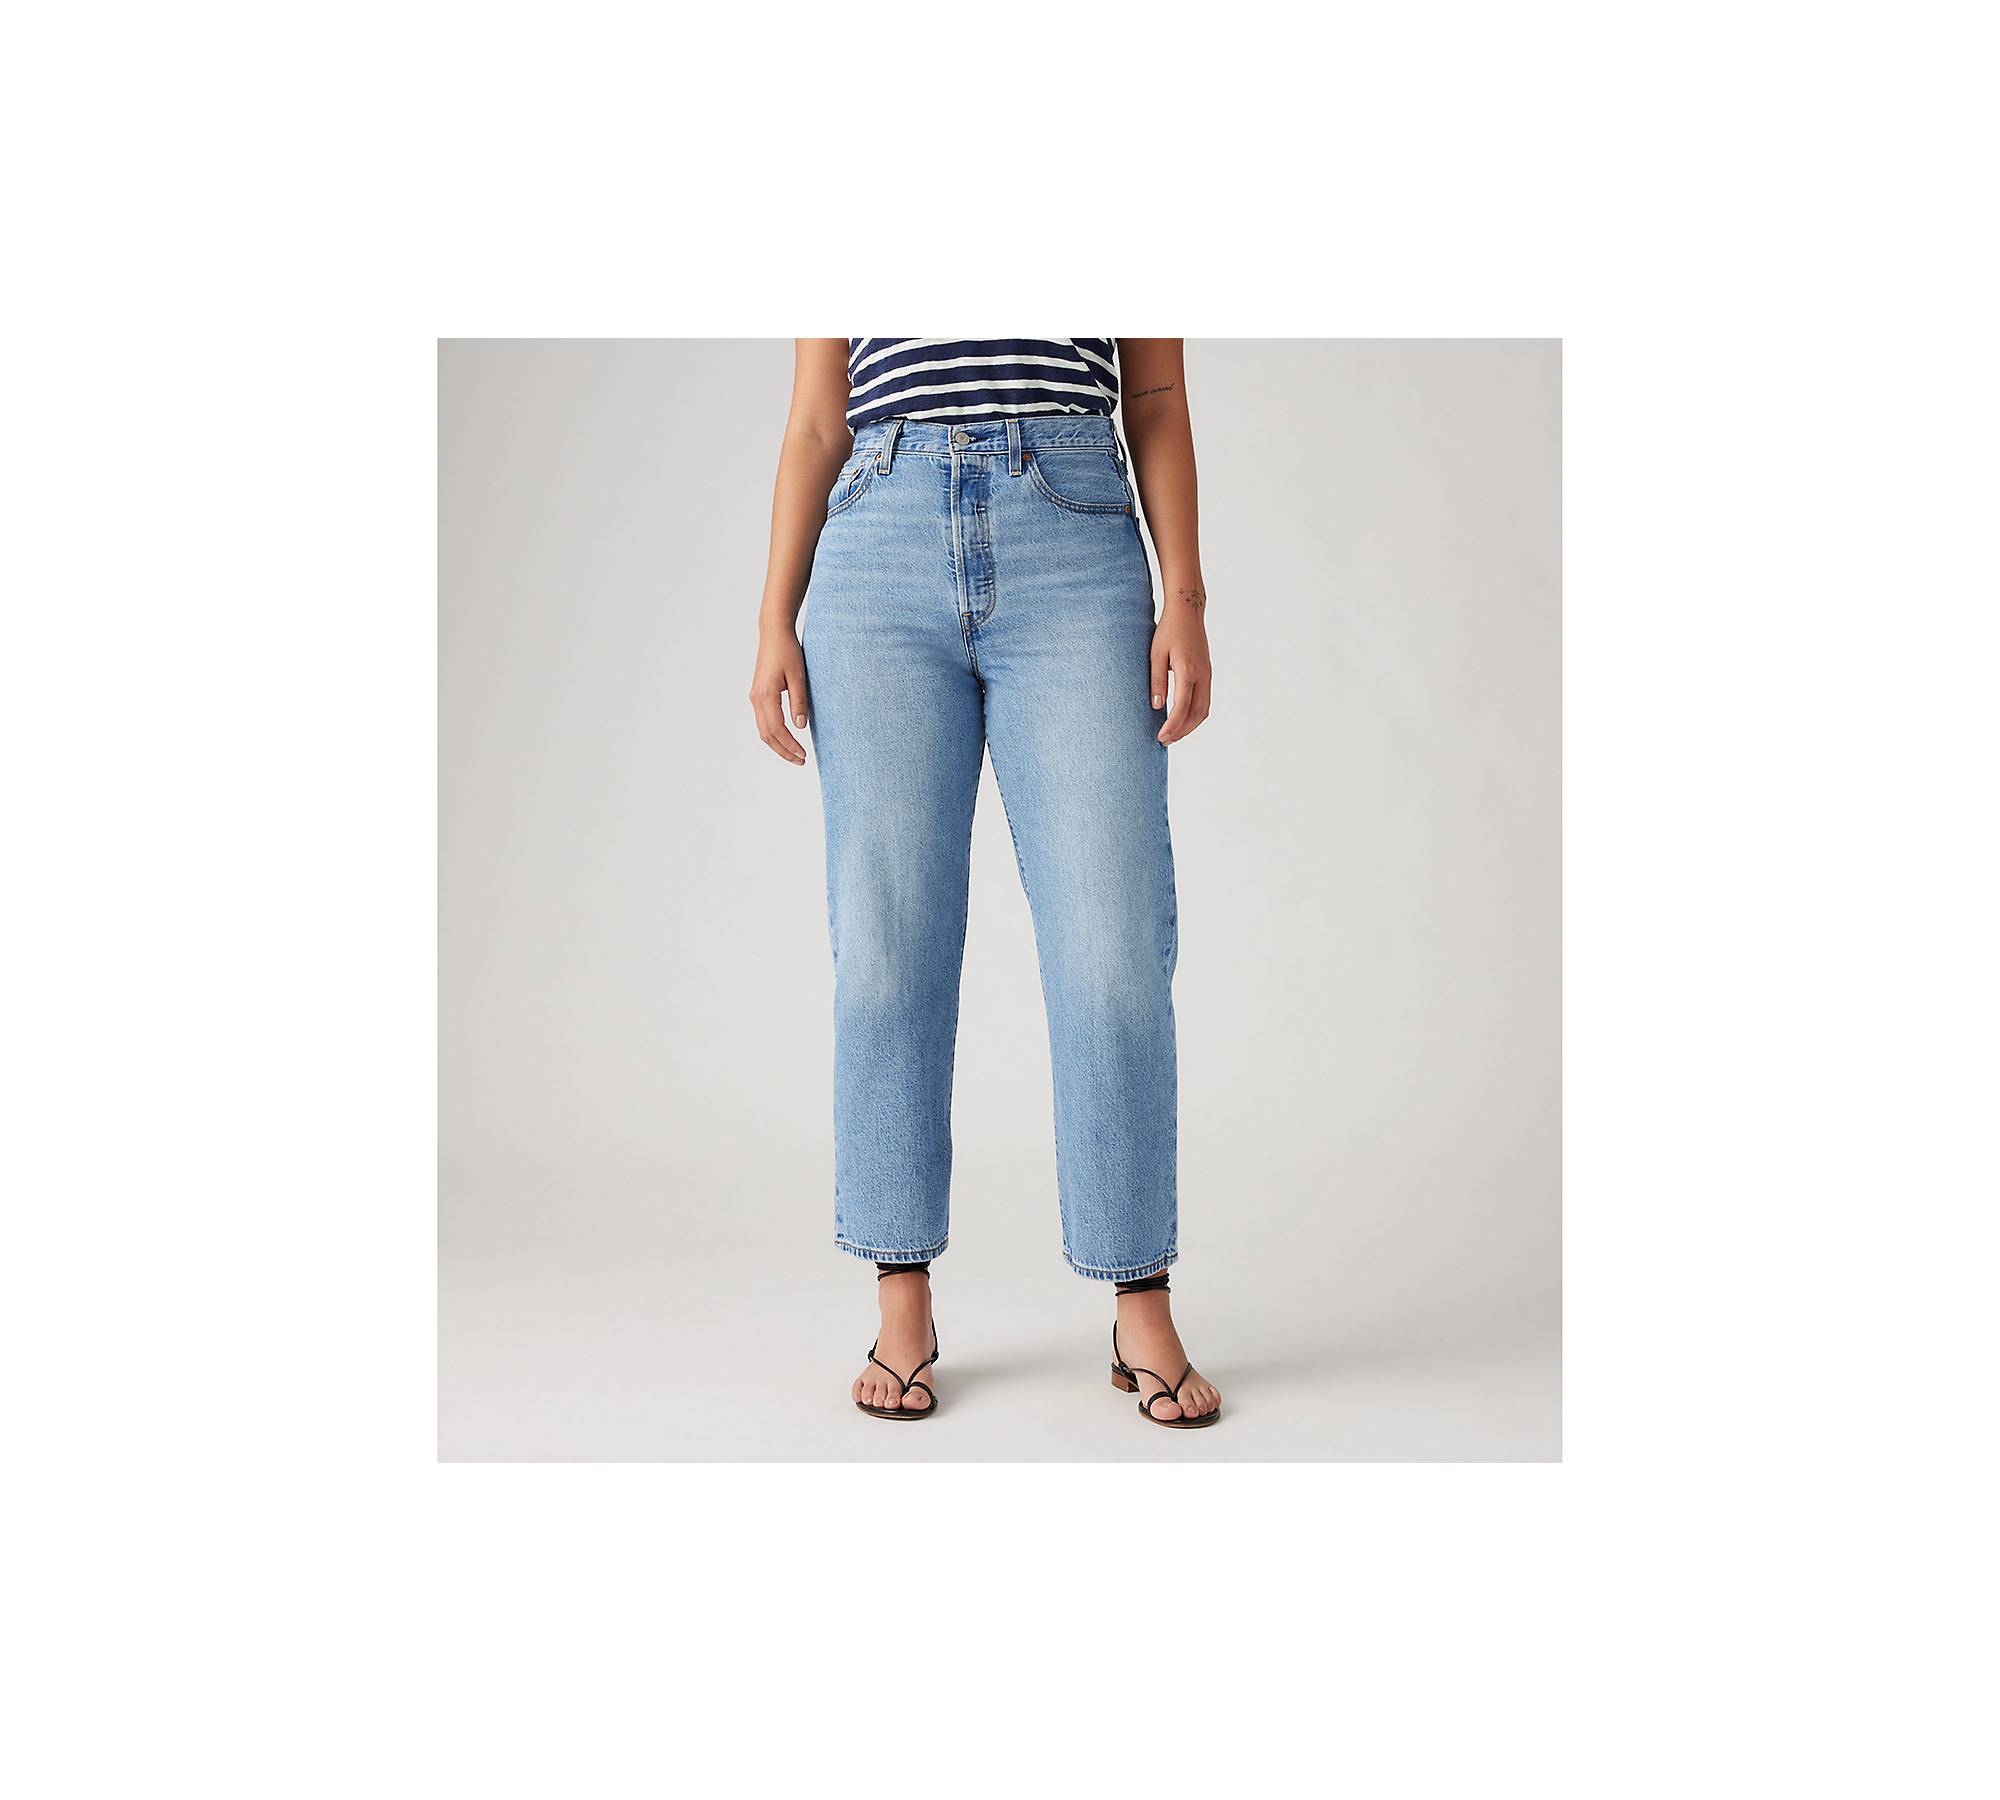 Levis Jeans - Ribcage Straight Ankle - Jive Swing » Kids Fashion